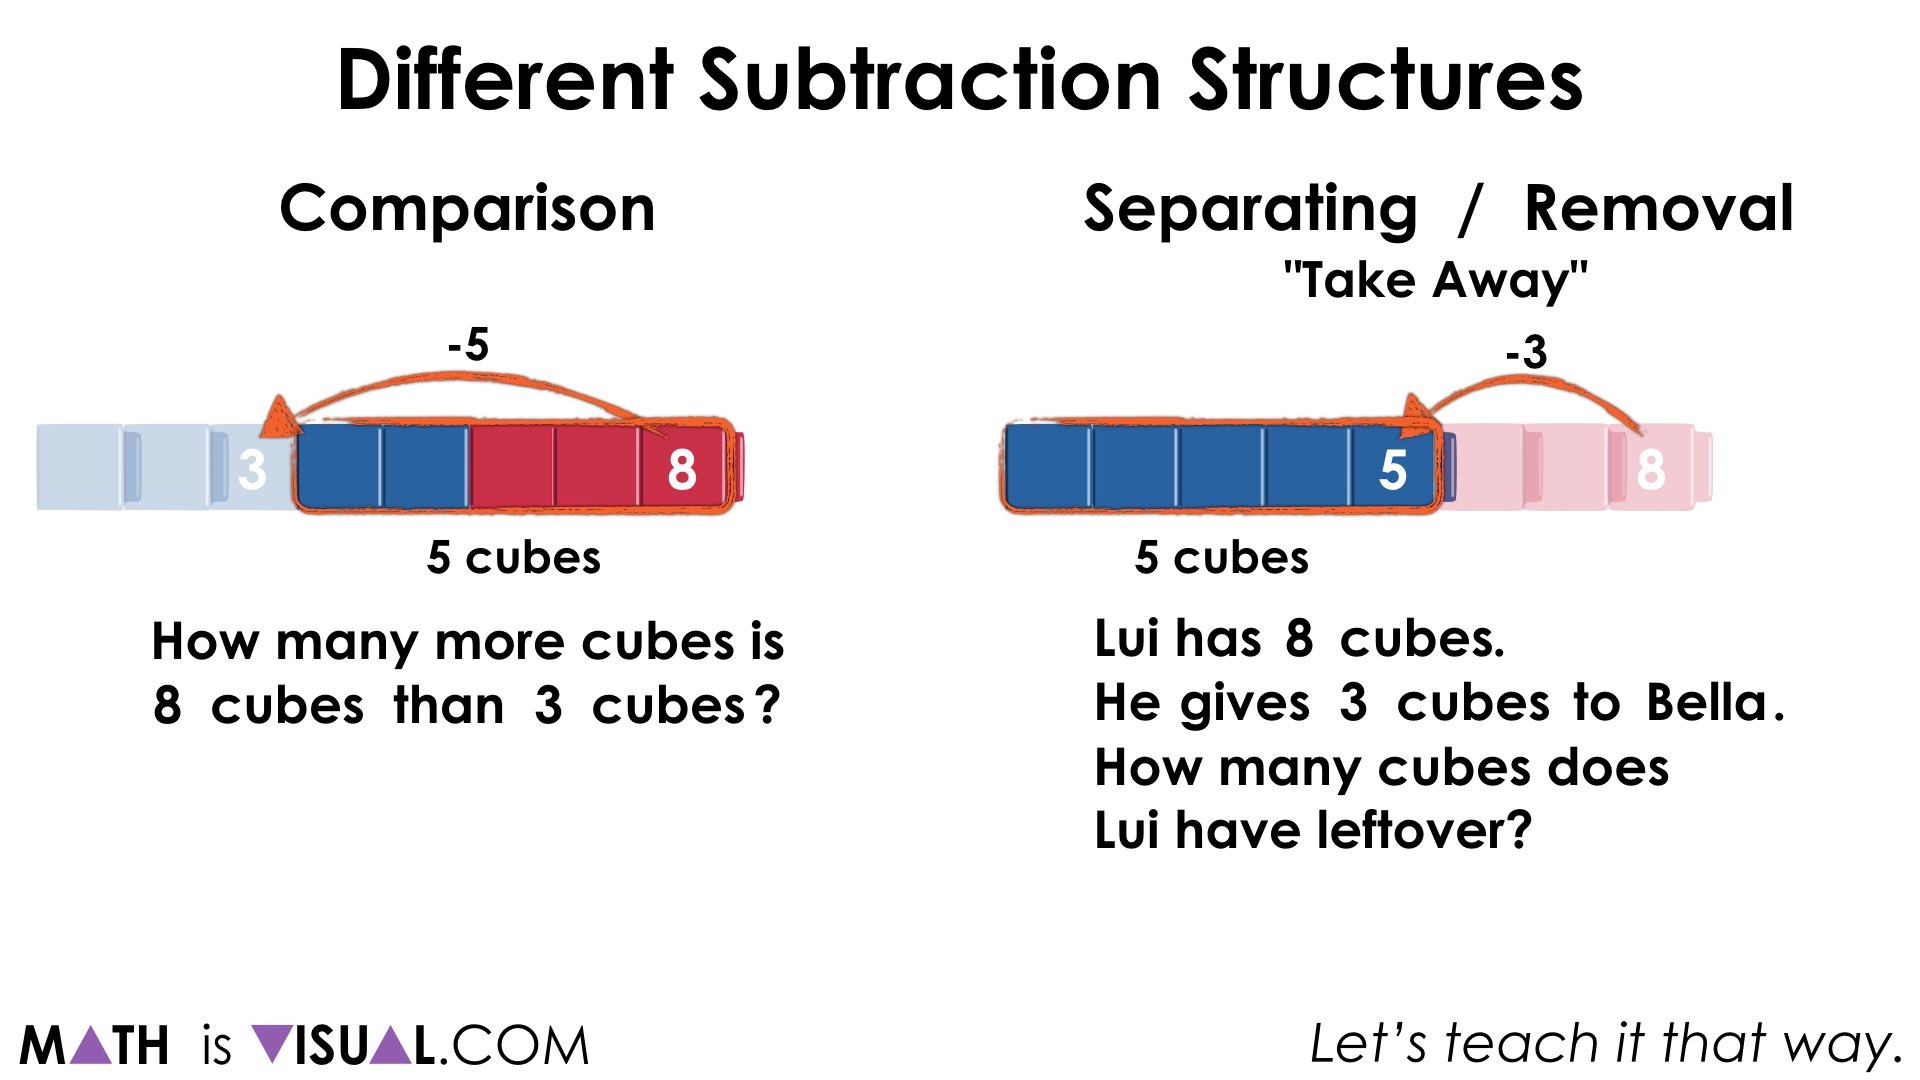 Comparing Comparison Subtraction and Separating Subtraction